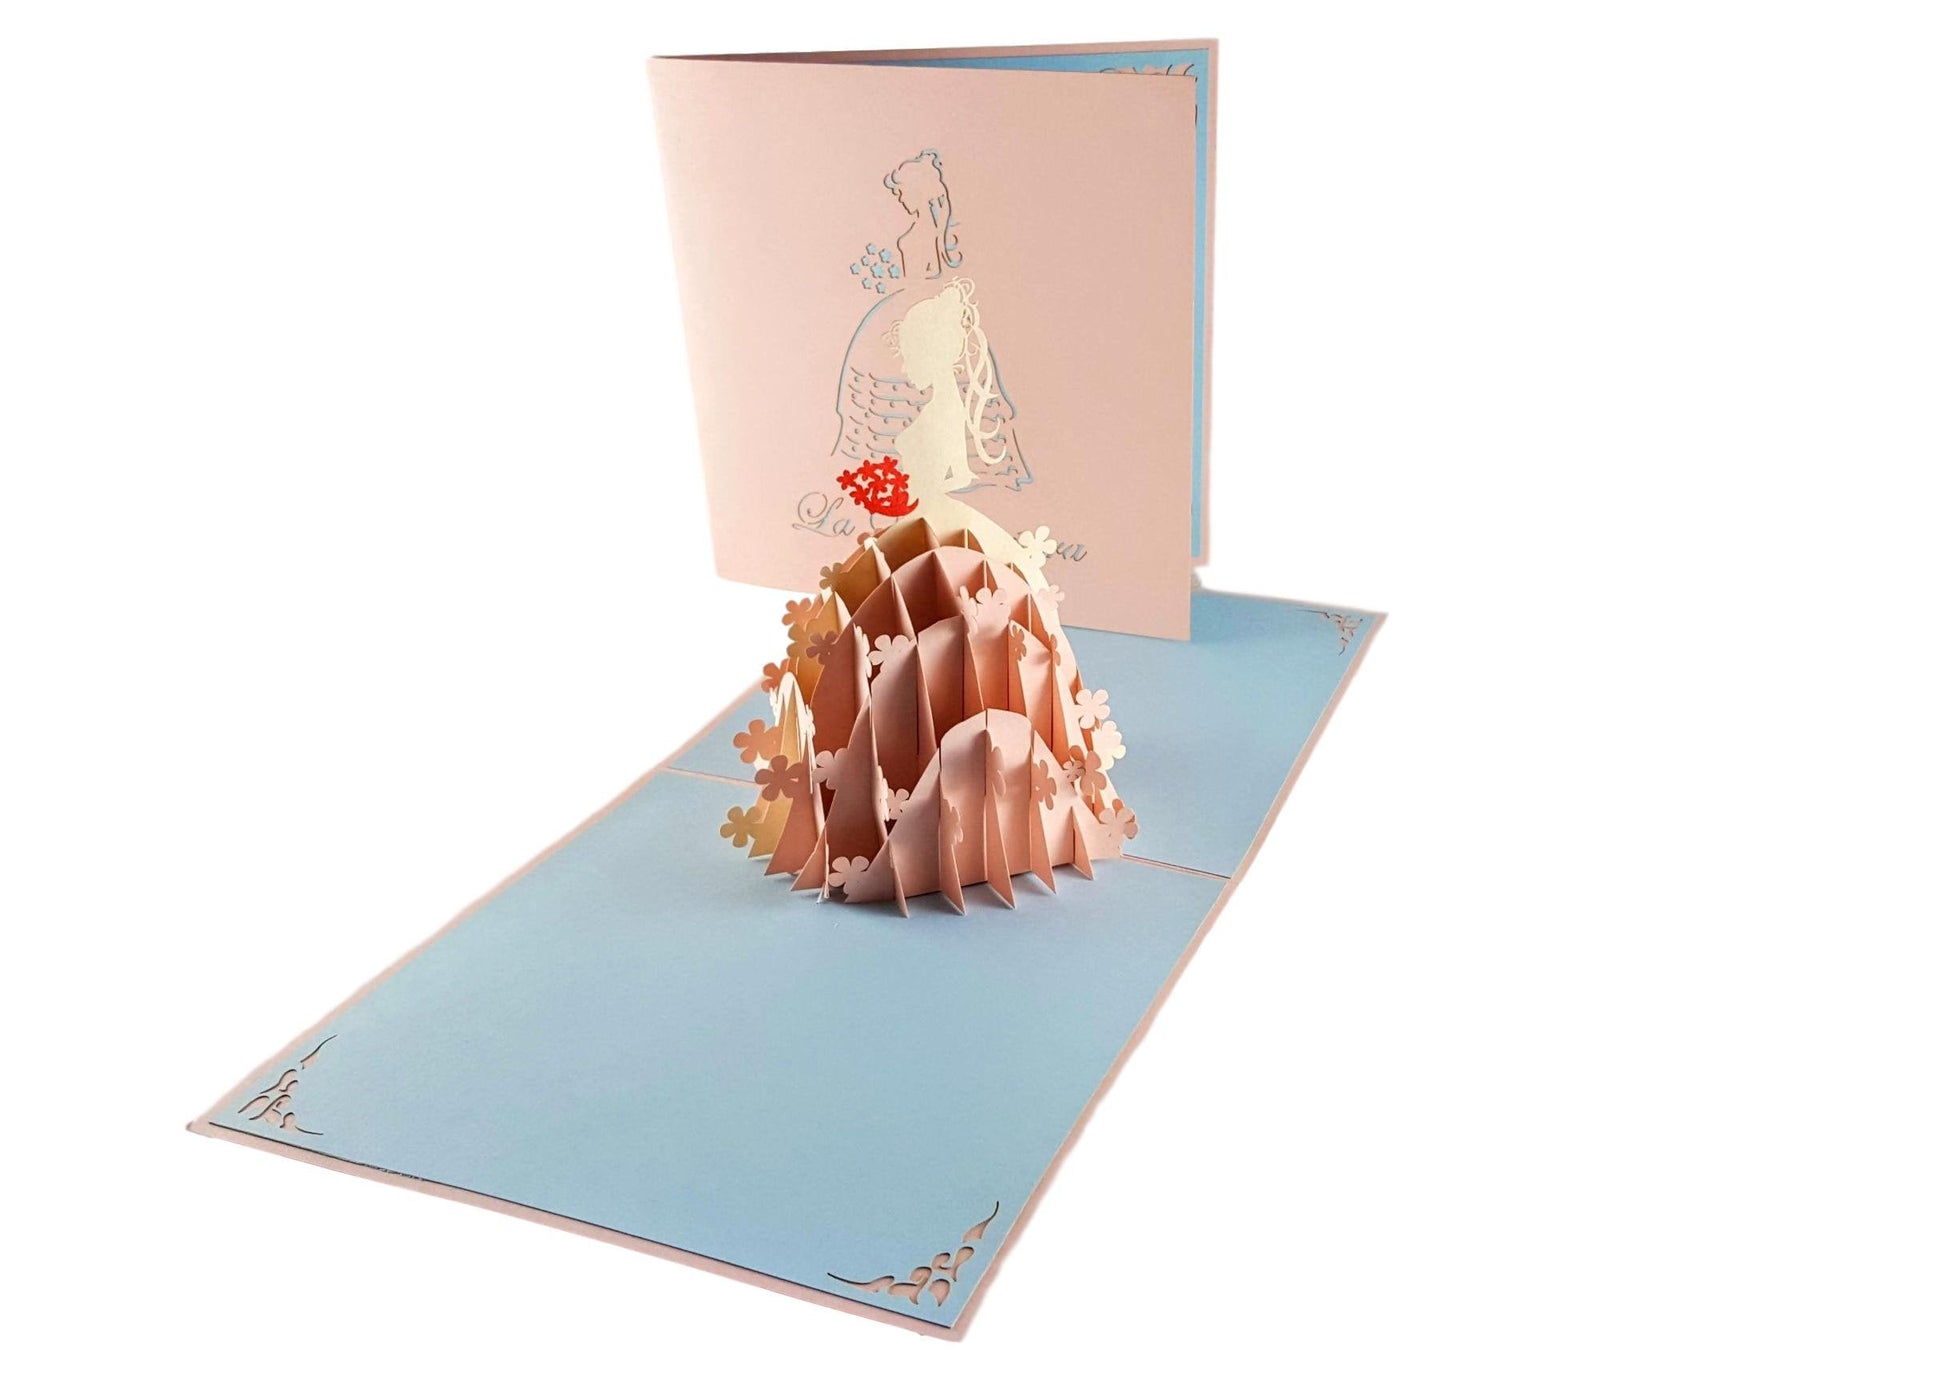 La Quinceañera (Pink) 3D Pop Up Greeting Card - Fun - Iconic - Special Days - iGifts And Cards